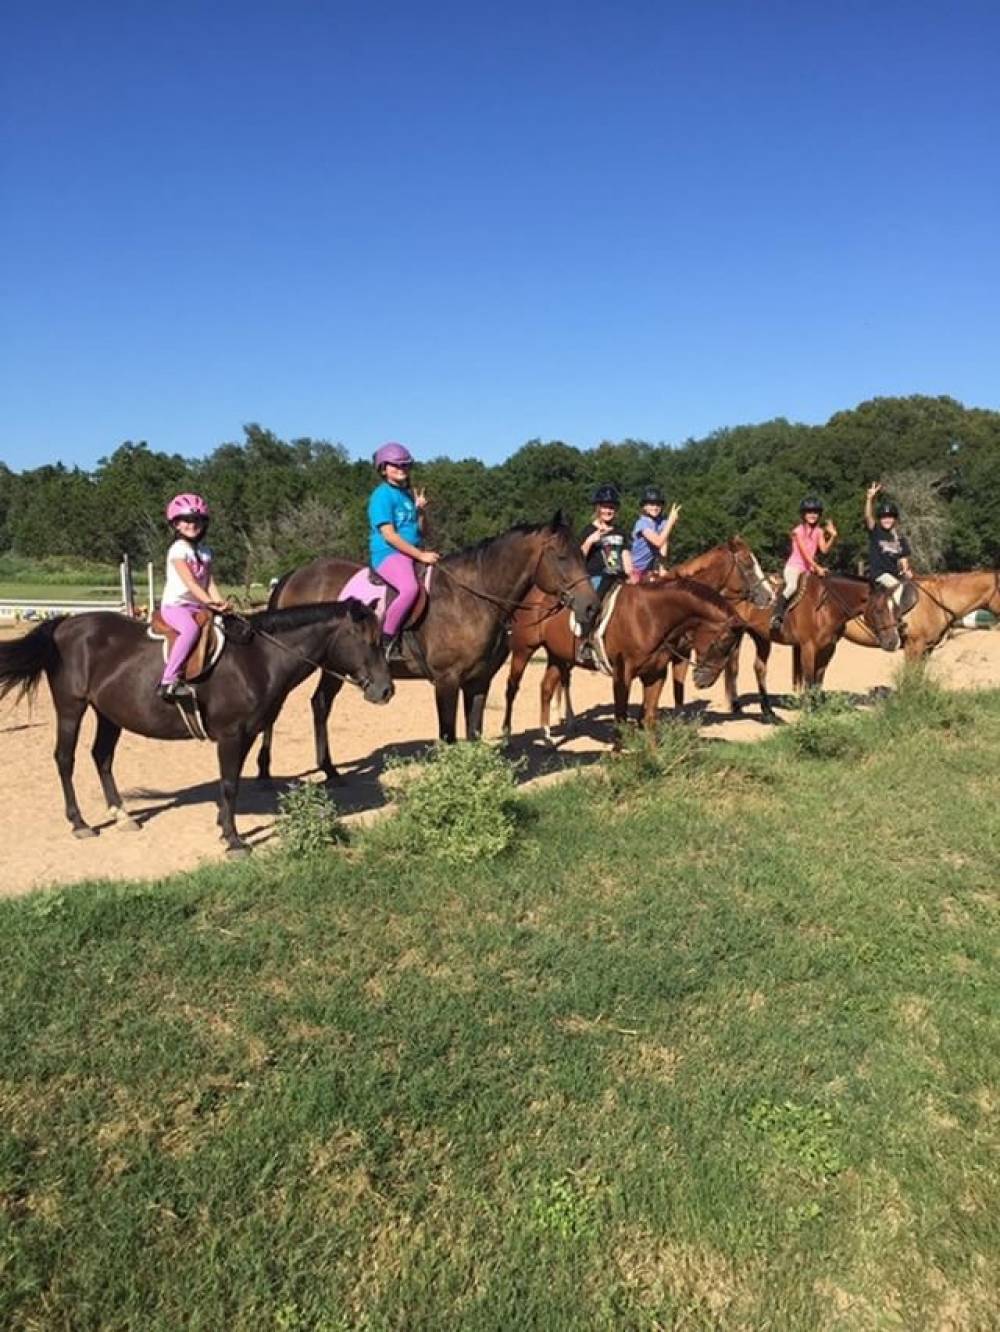 TOP TEXAS SUMMER CAMP: Hunters Chase Farms Inc. is a Top Summer Camp located in Wimberley Texas offering many fun and enriching camp programs. Hunters Chase Farms Inc. also offers CIT/LIT and/or Teen Leadership Opportunities, too.